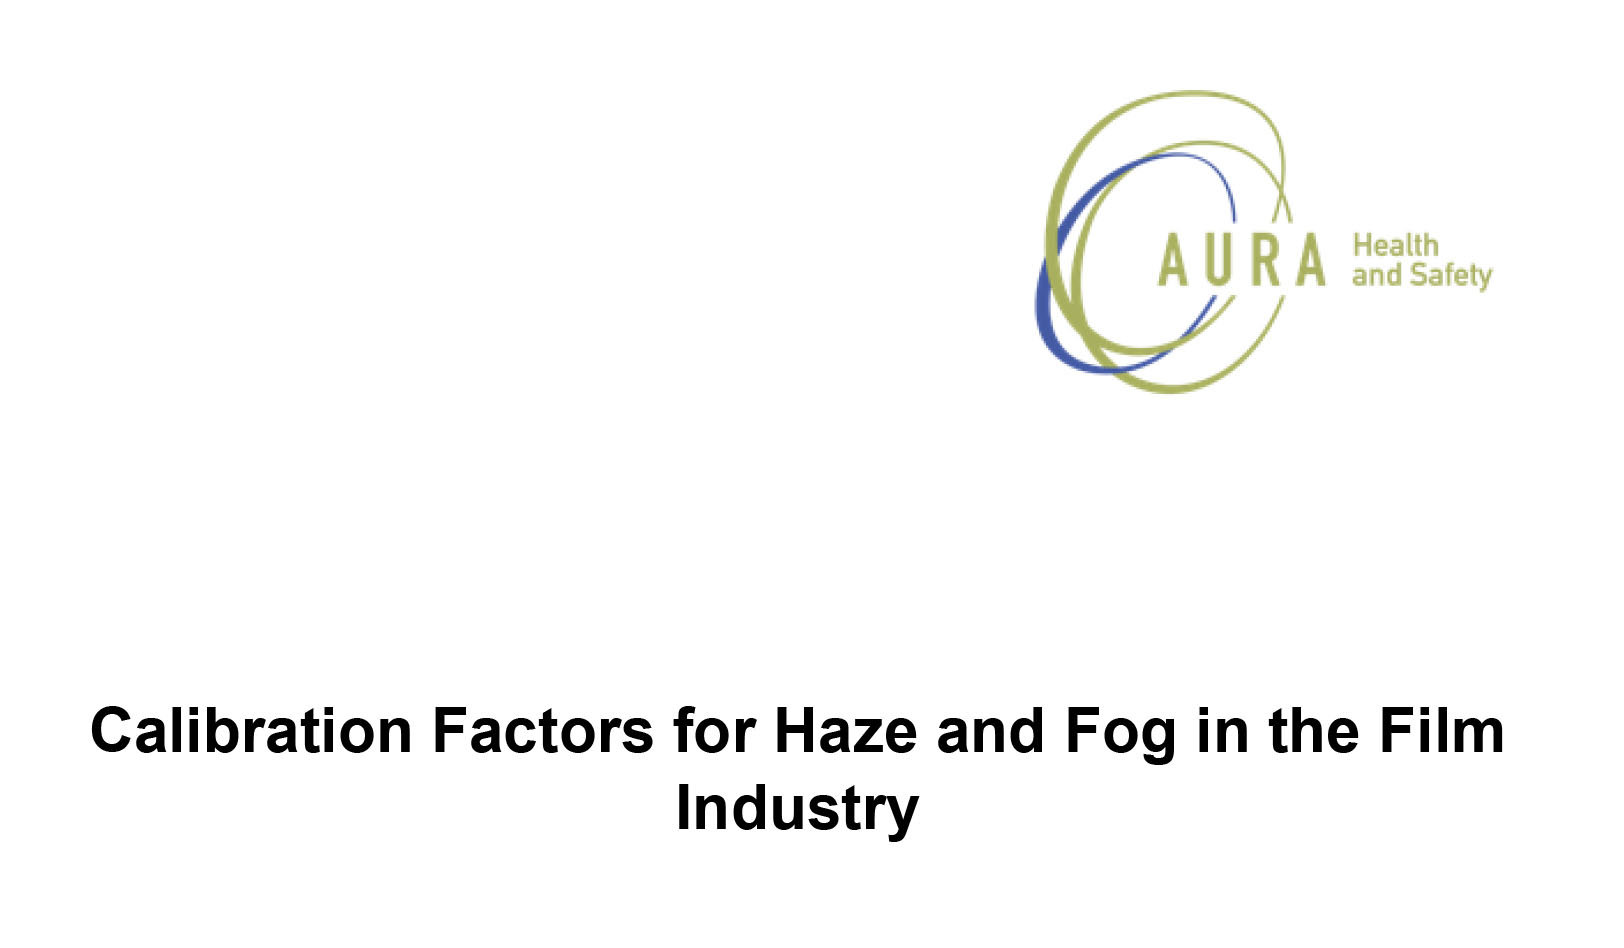 Calibration Factors for Haze and Fog in the Film Industry